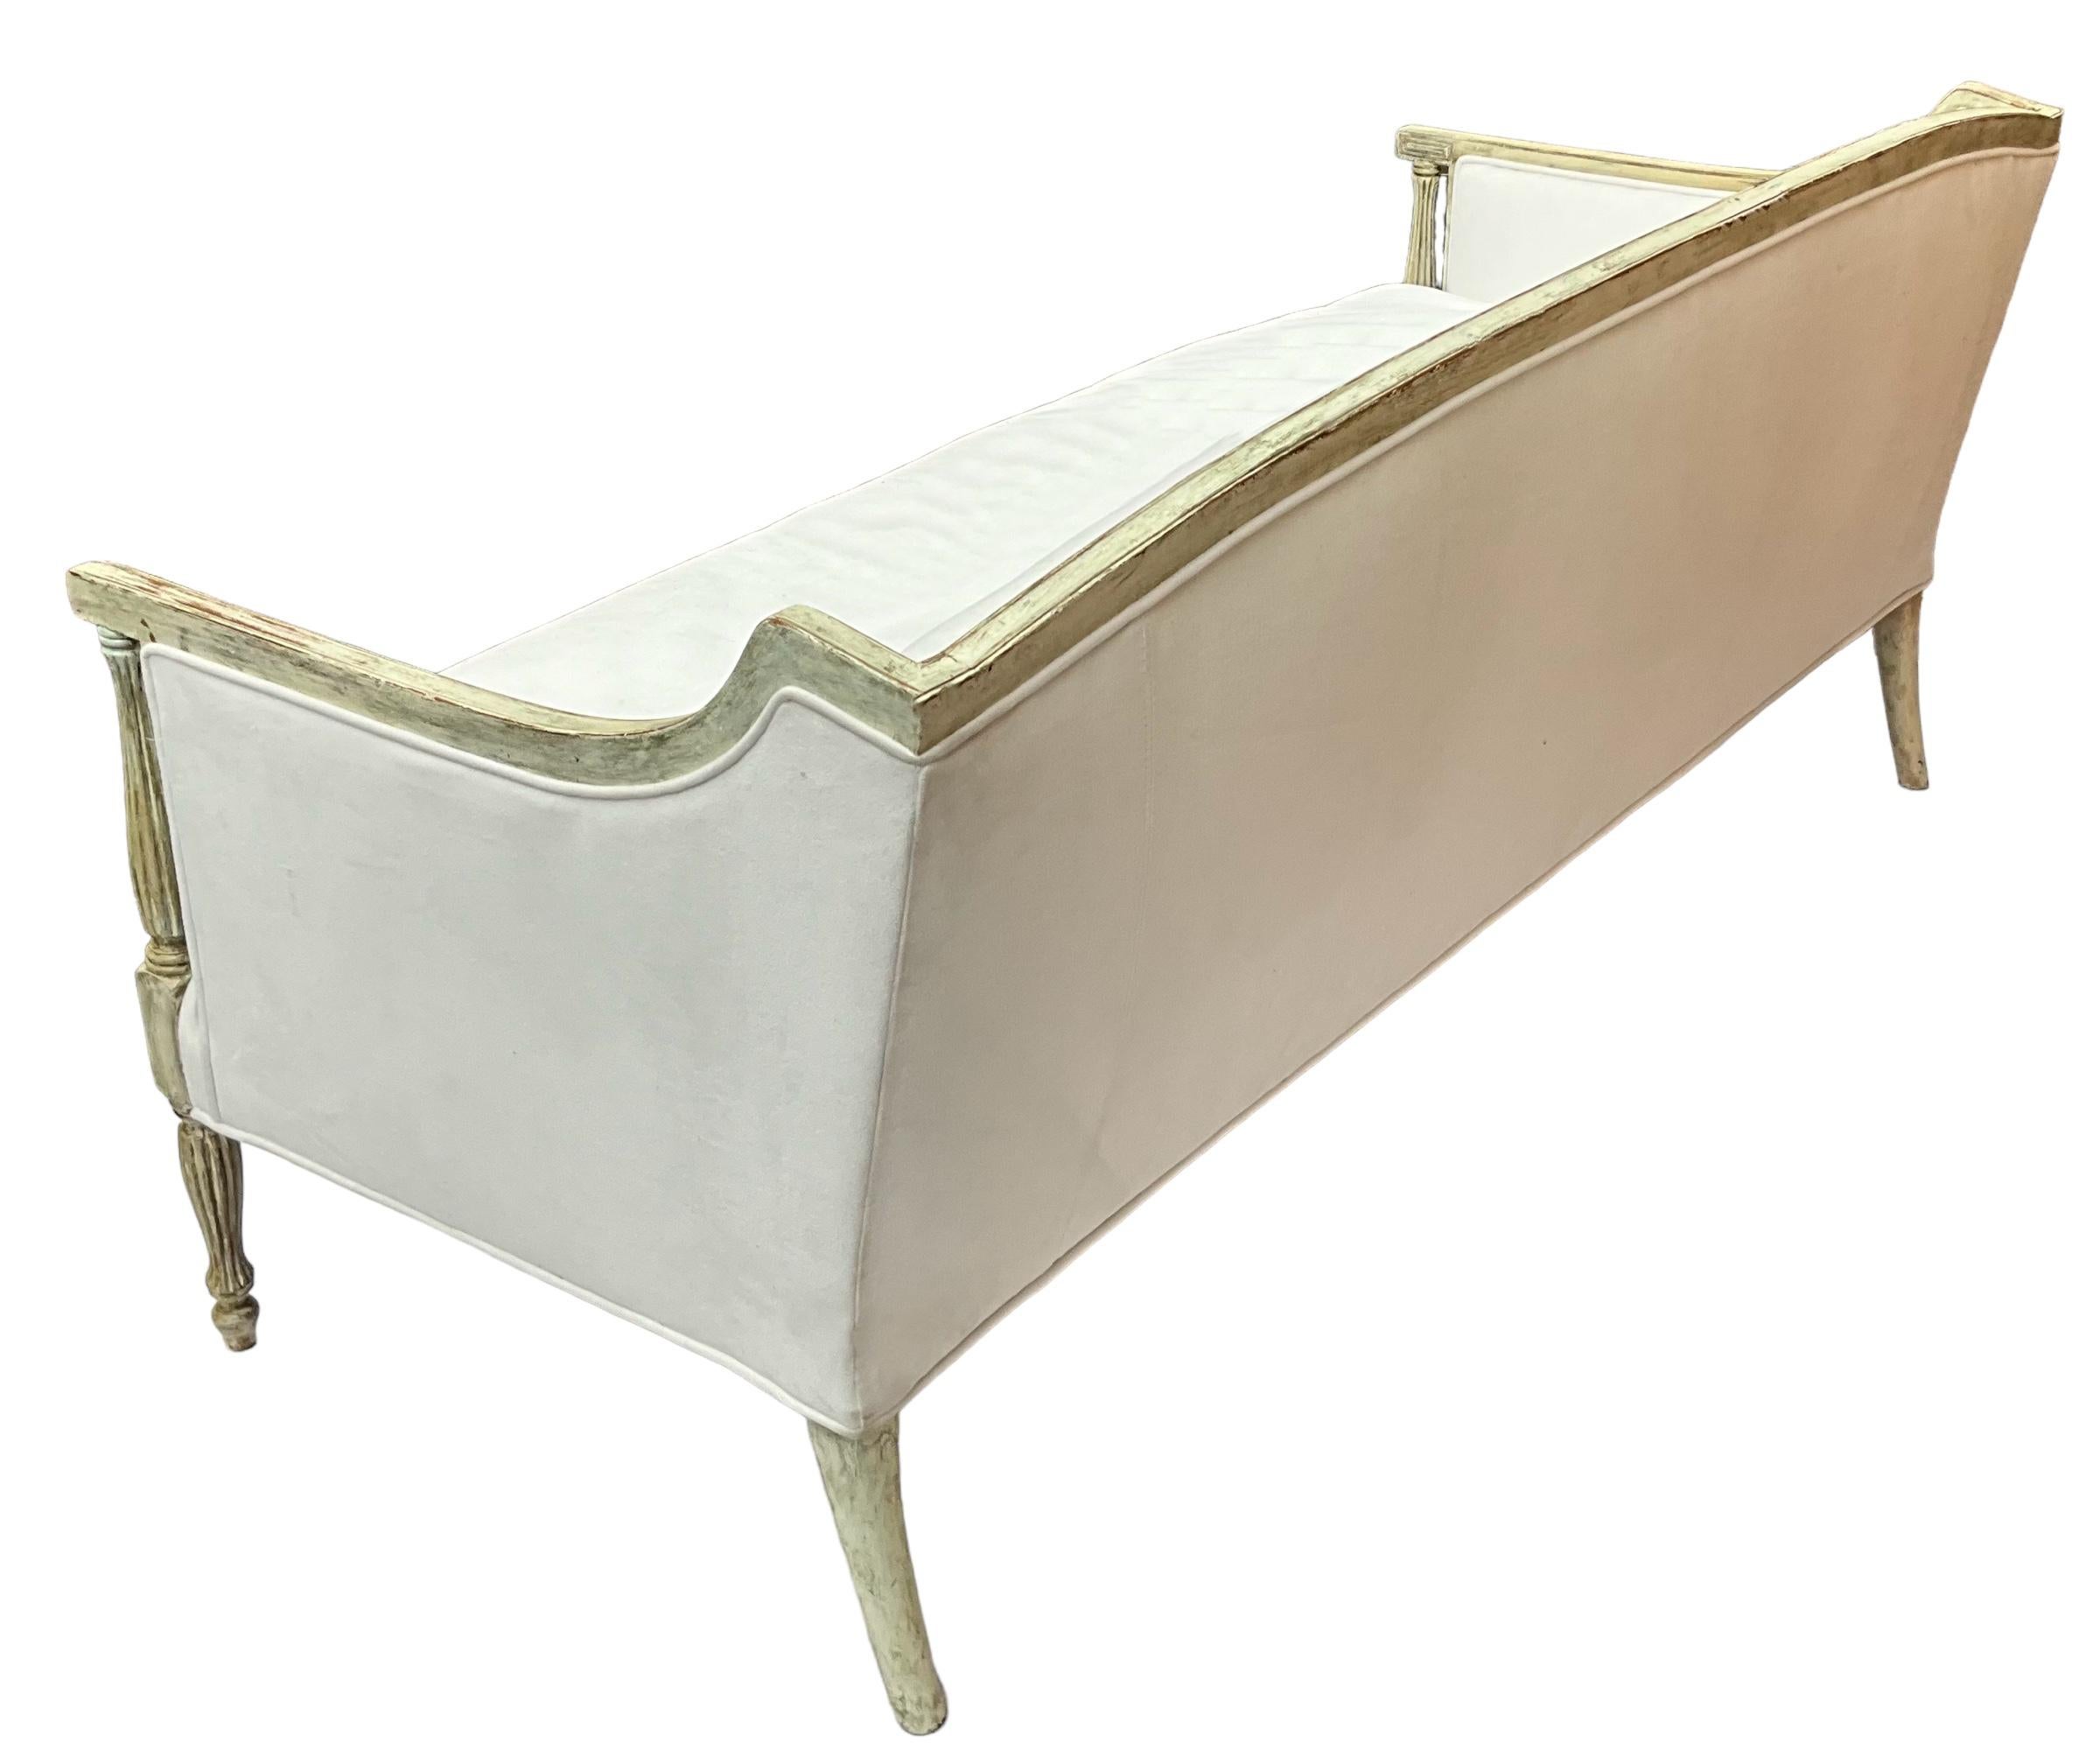 American Early 20th-C. Federal Style Sofa W/ Painted Gustavian Finish & White Upholstery 